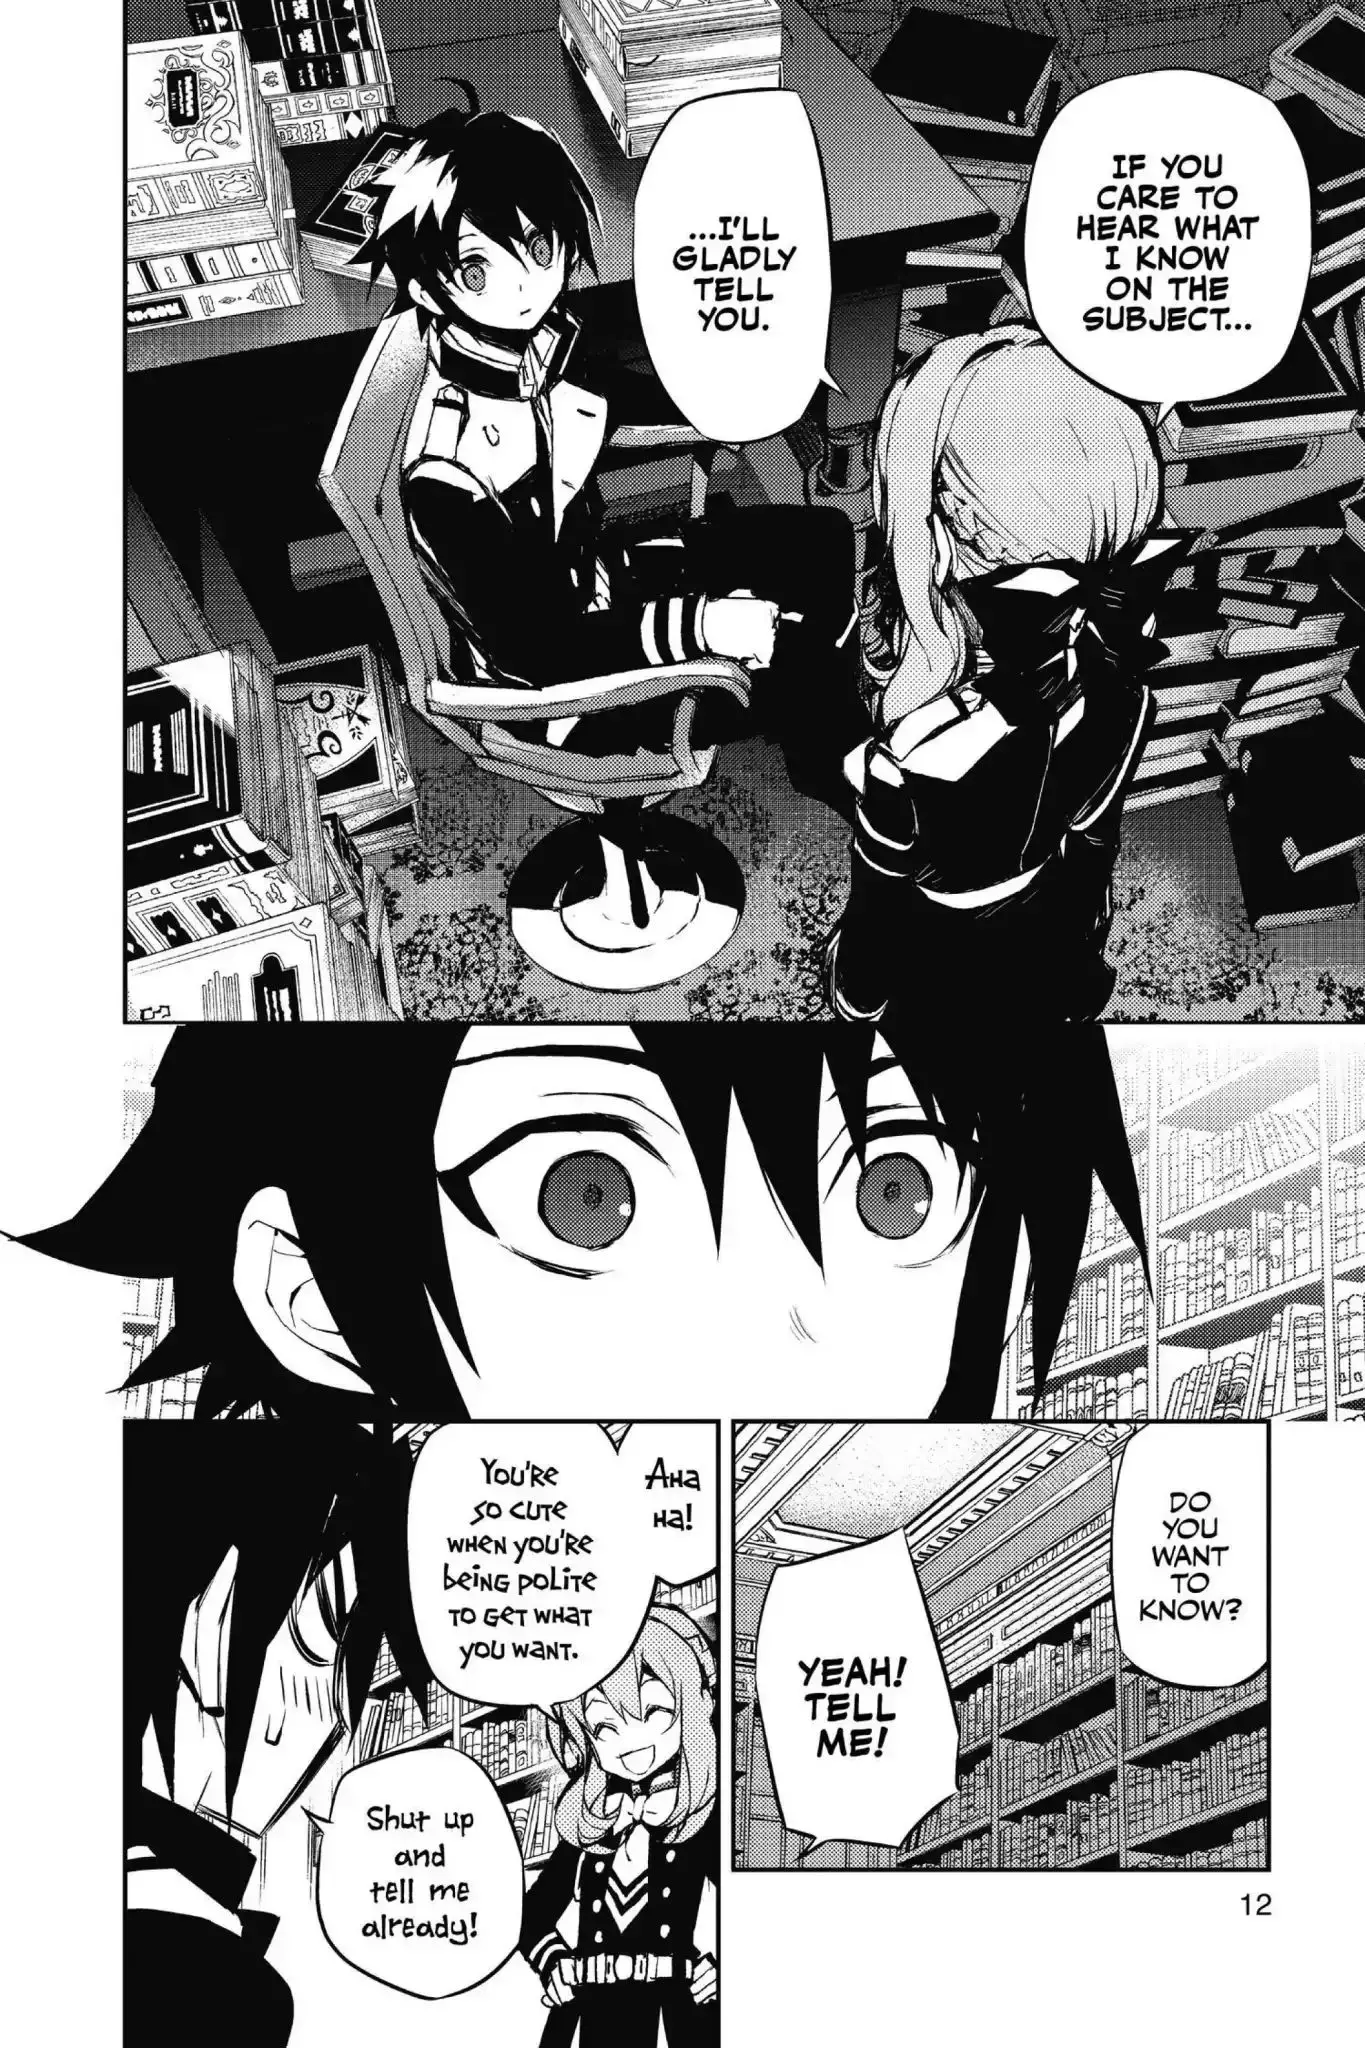 Seraph Of The End - 16 page 12-4523045f